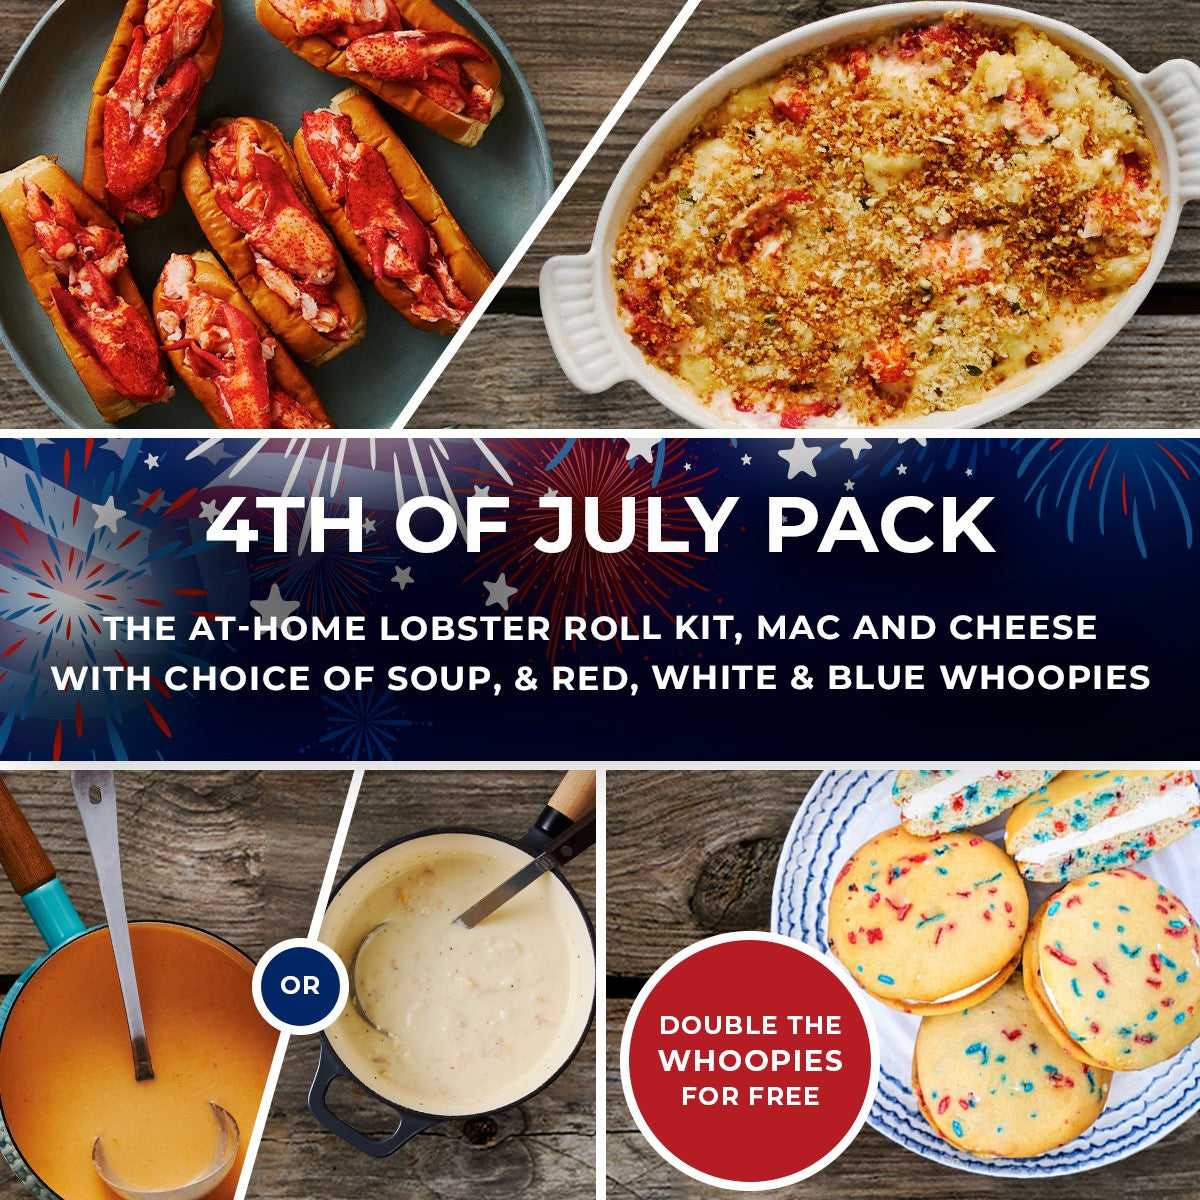 The 4th of July Pack